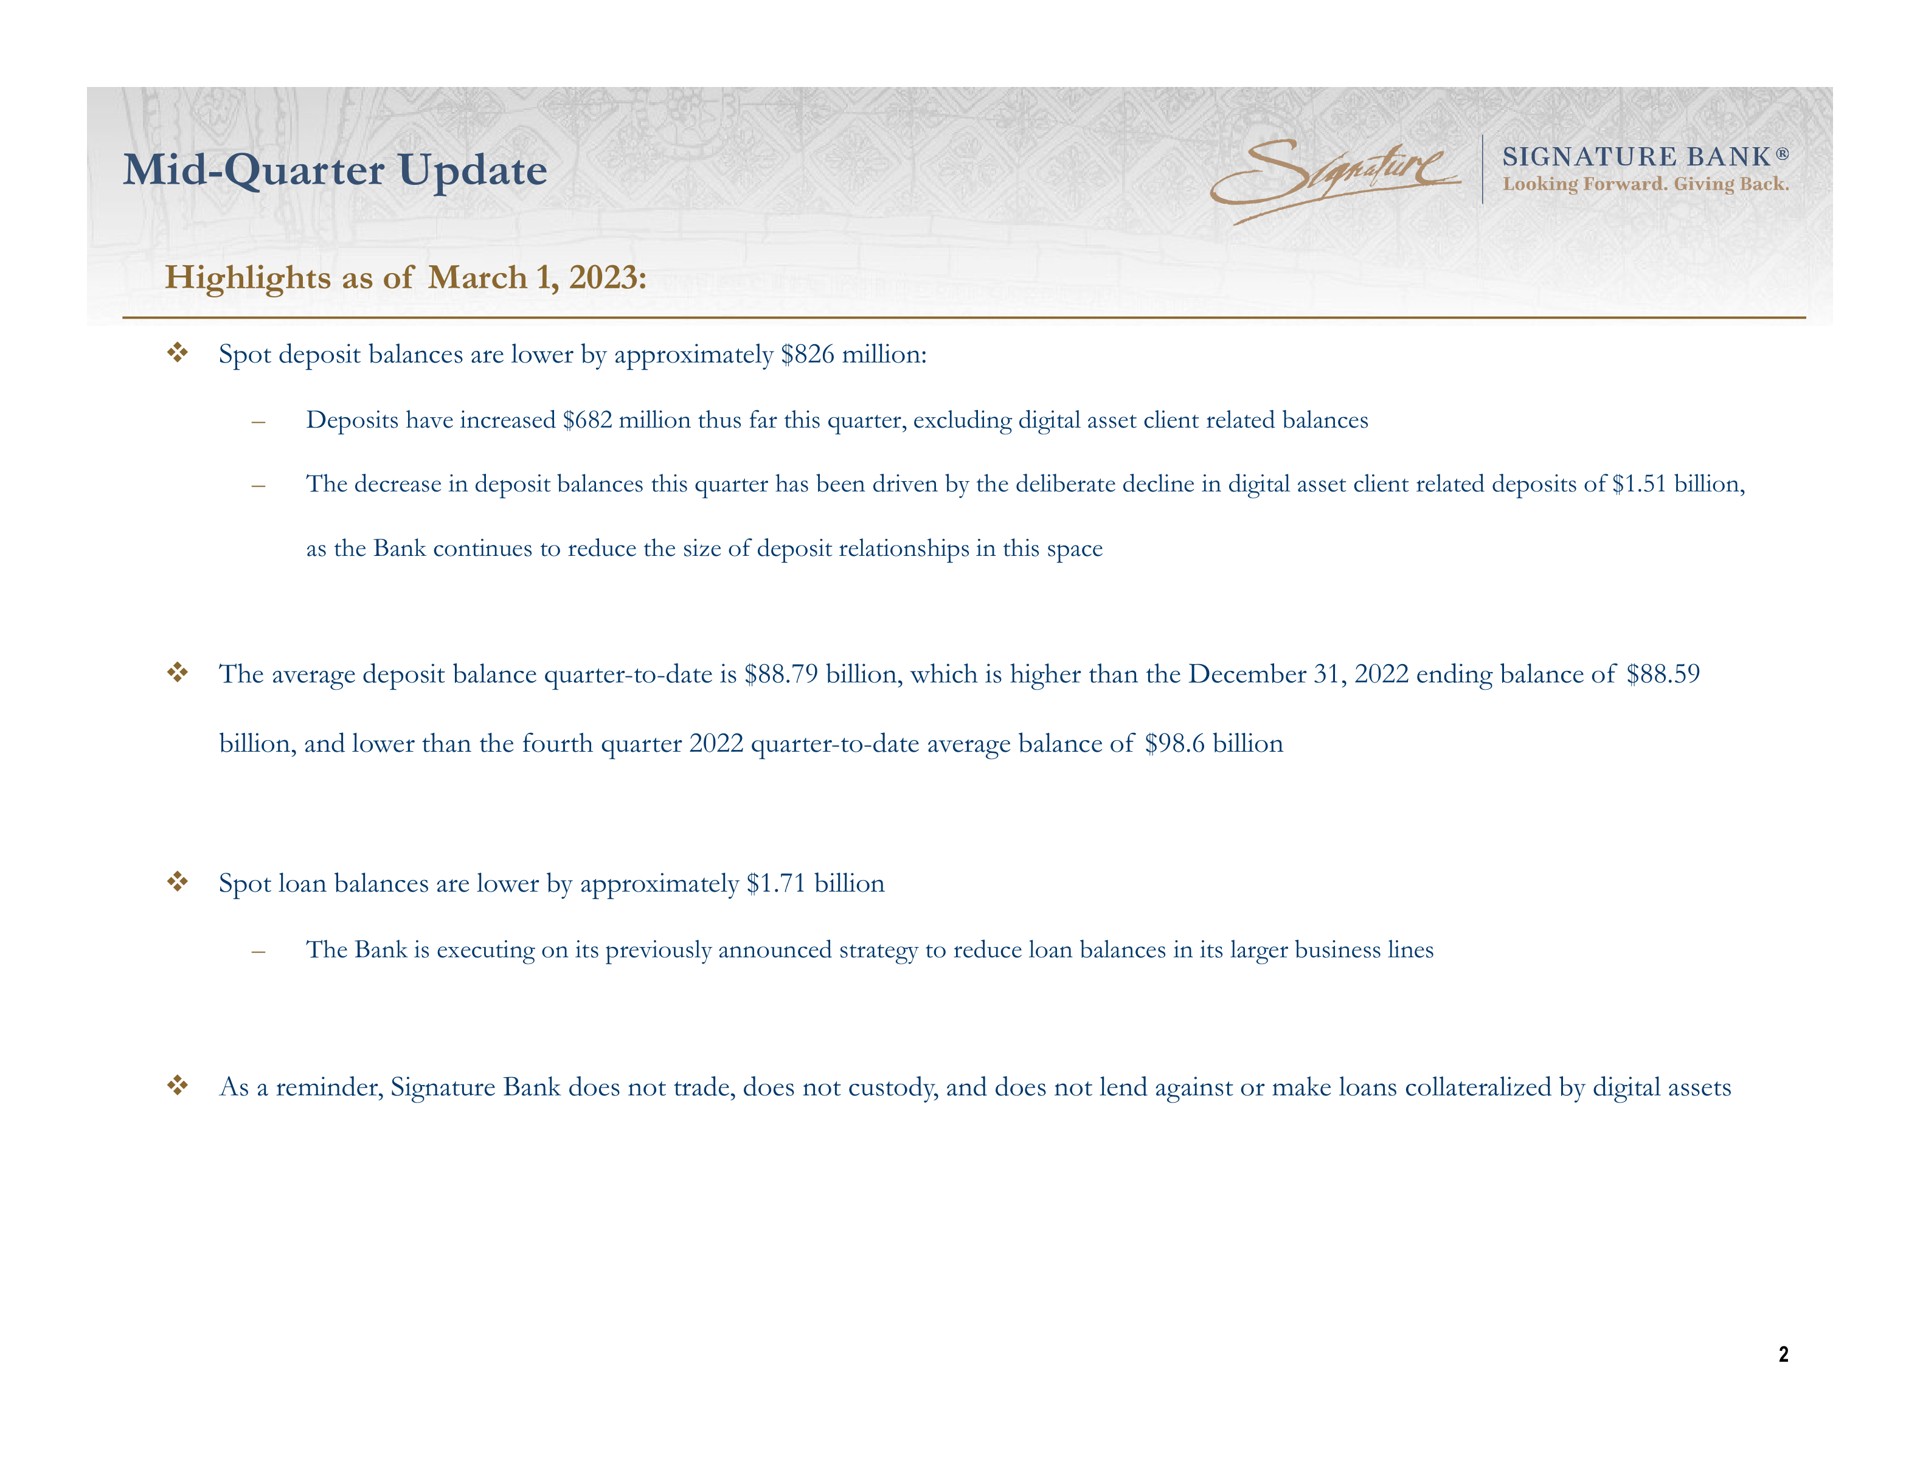 mid quarter update highlights as of march | Signature Bank